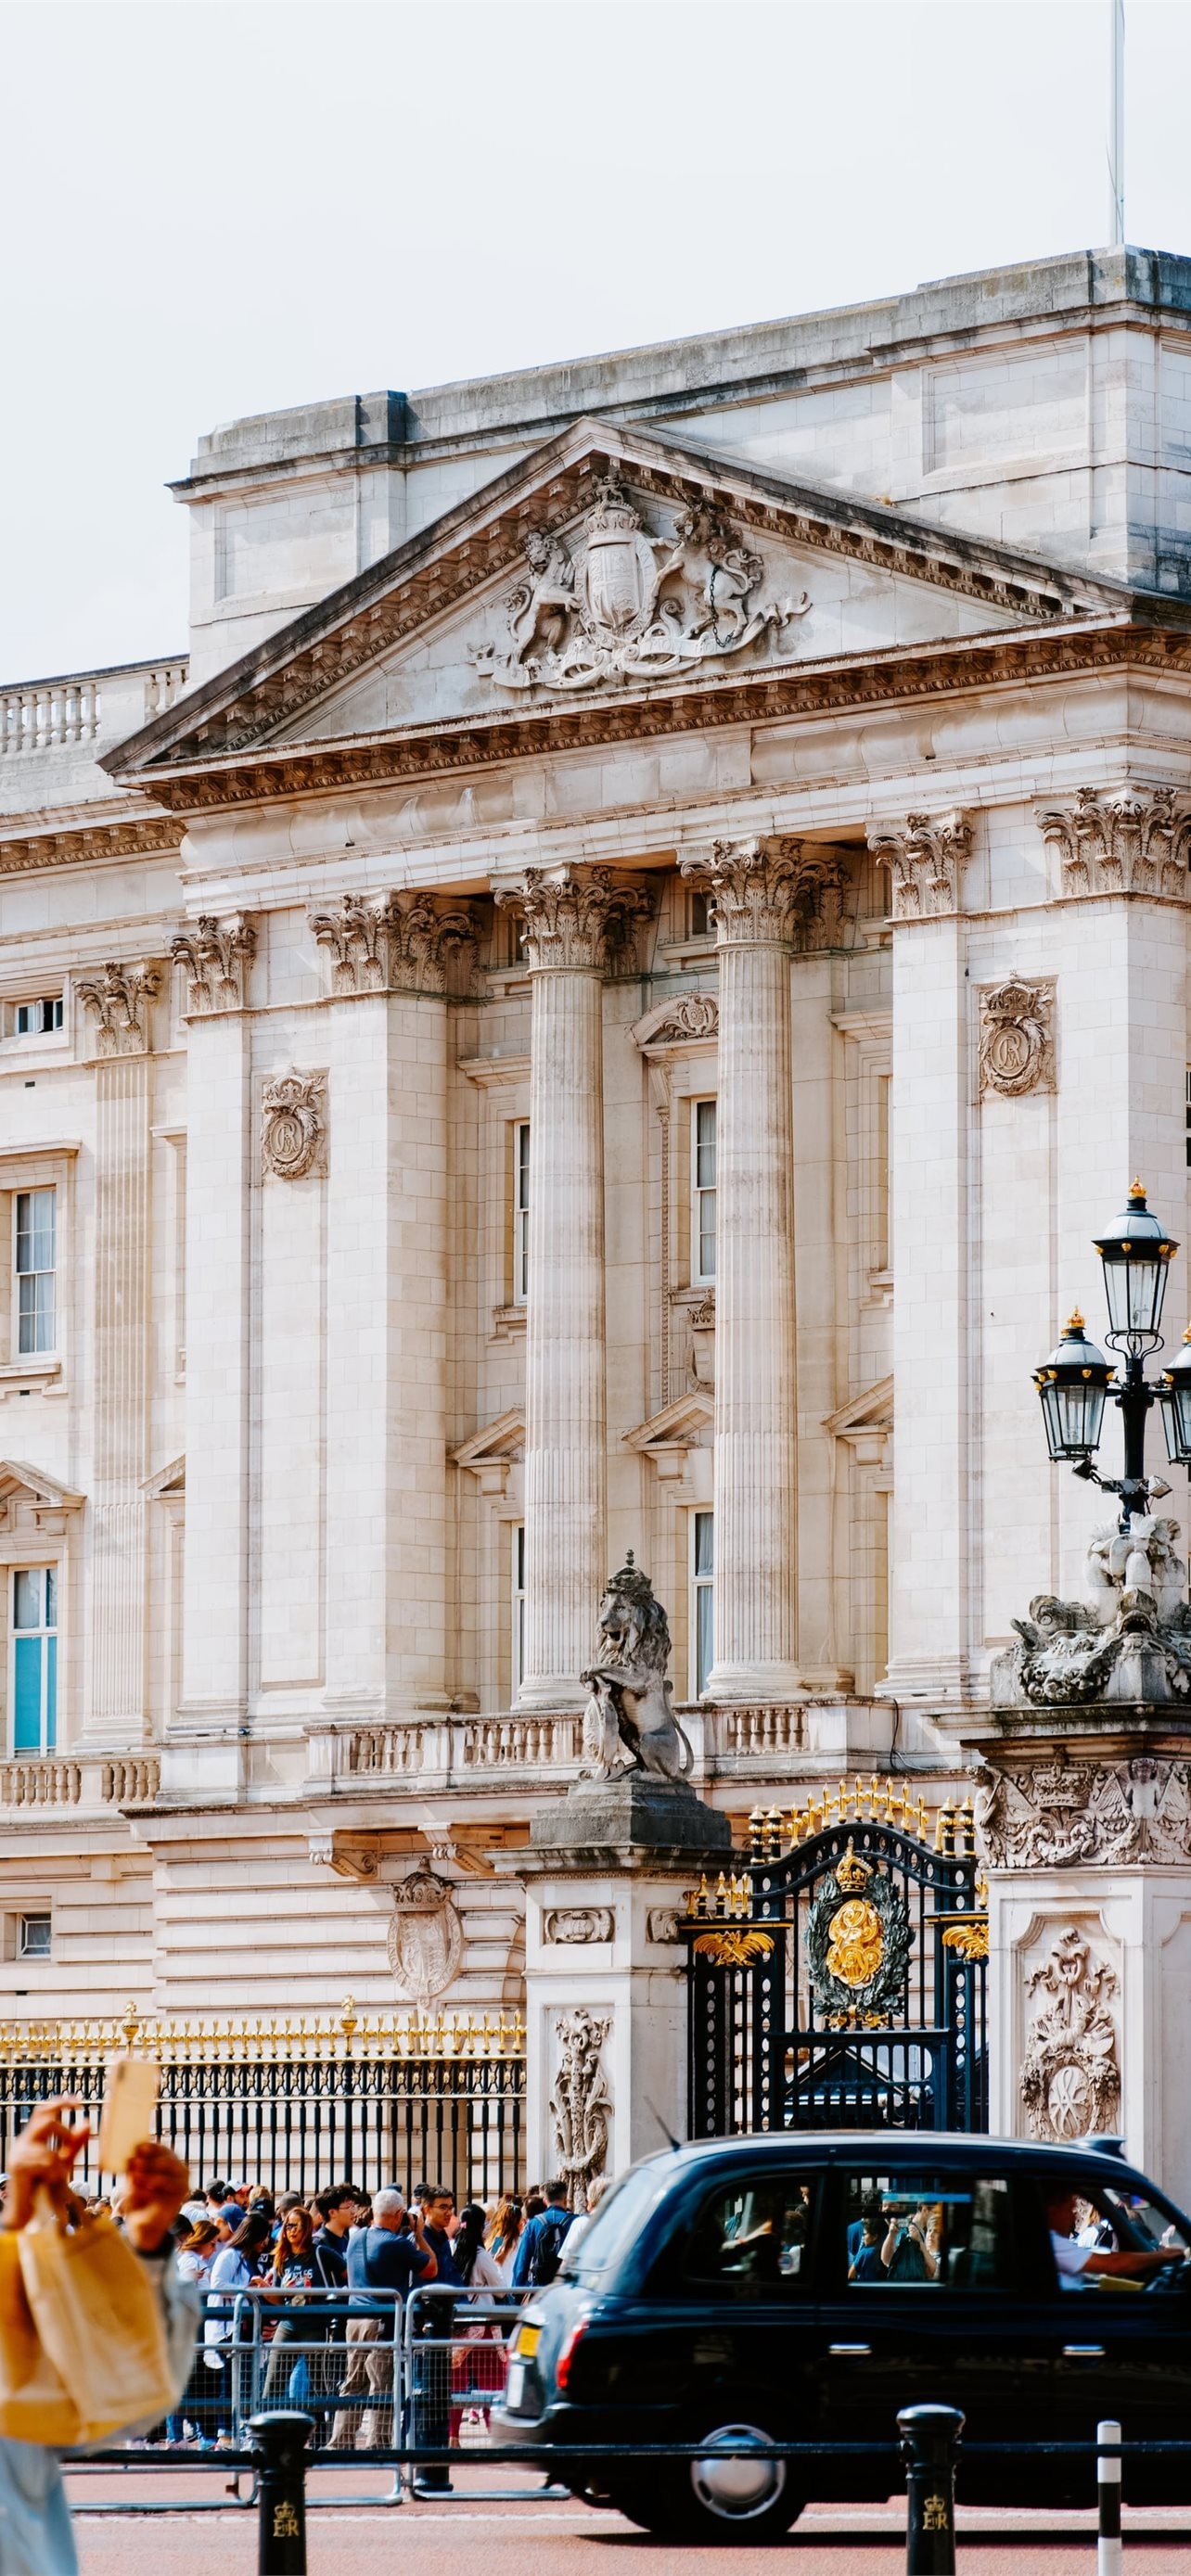 Buckingham Palace, Best iPhone wallpapers, HD wallpapers, Buckingham Palace, 1290x2780 HD Phone